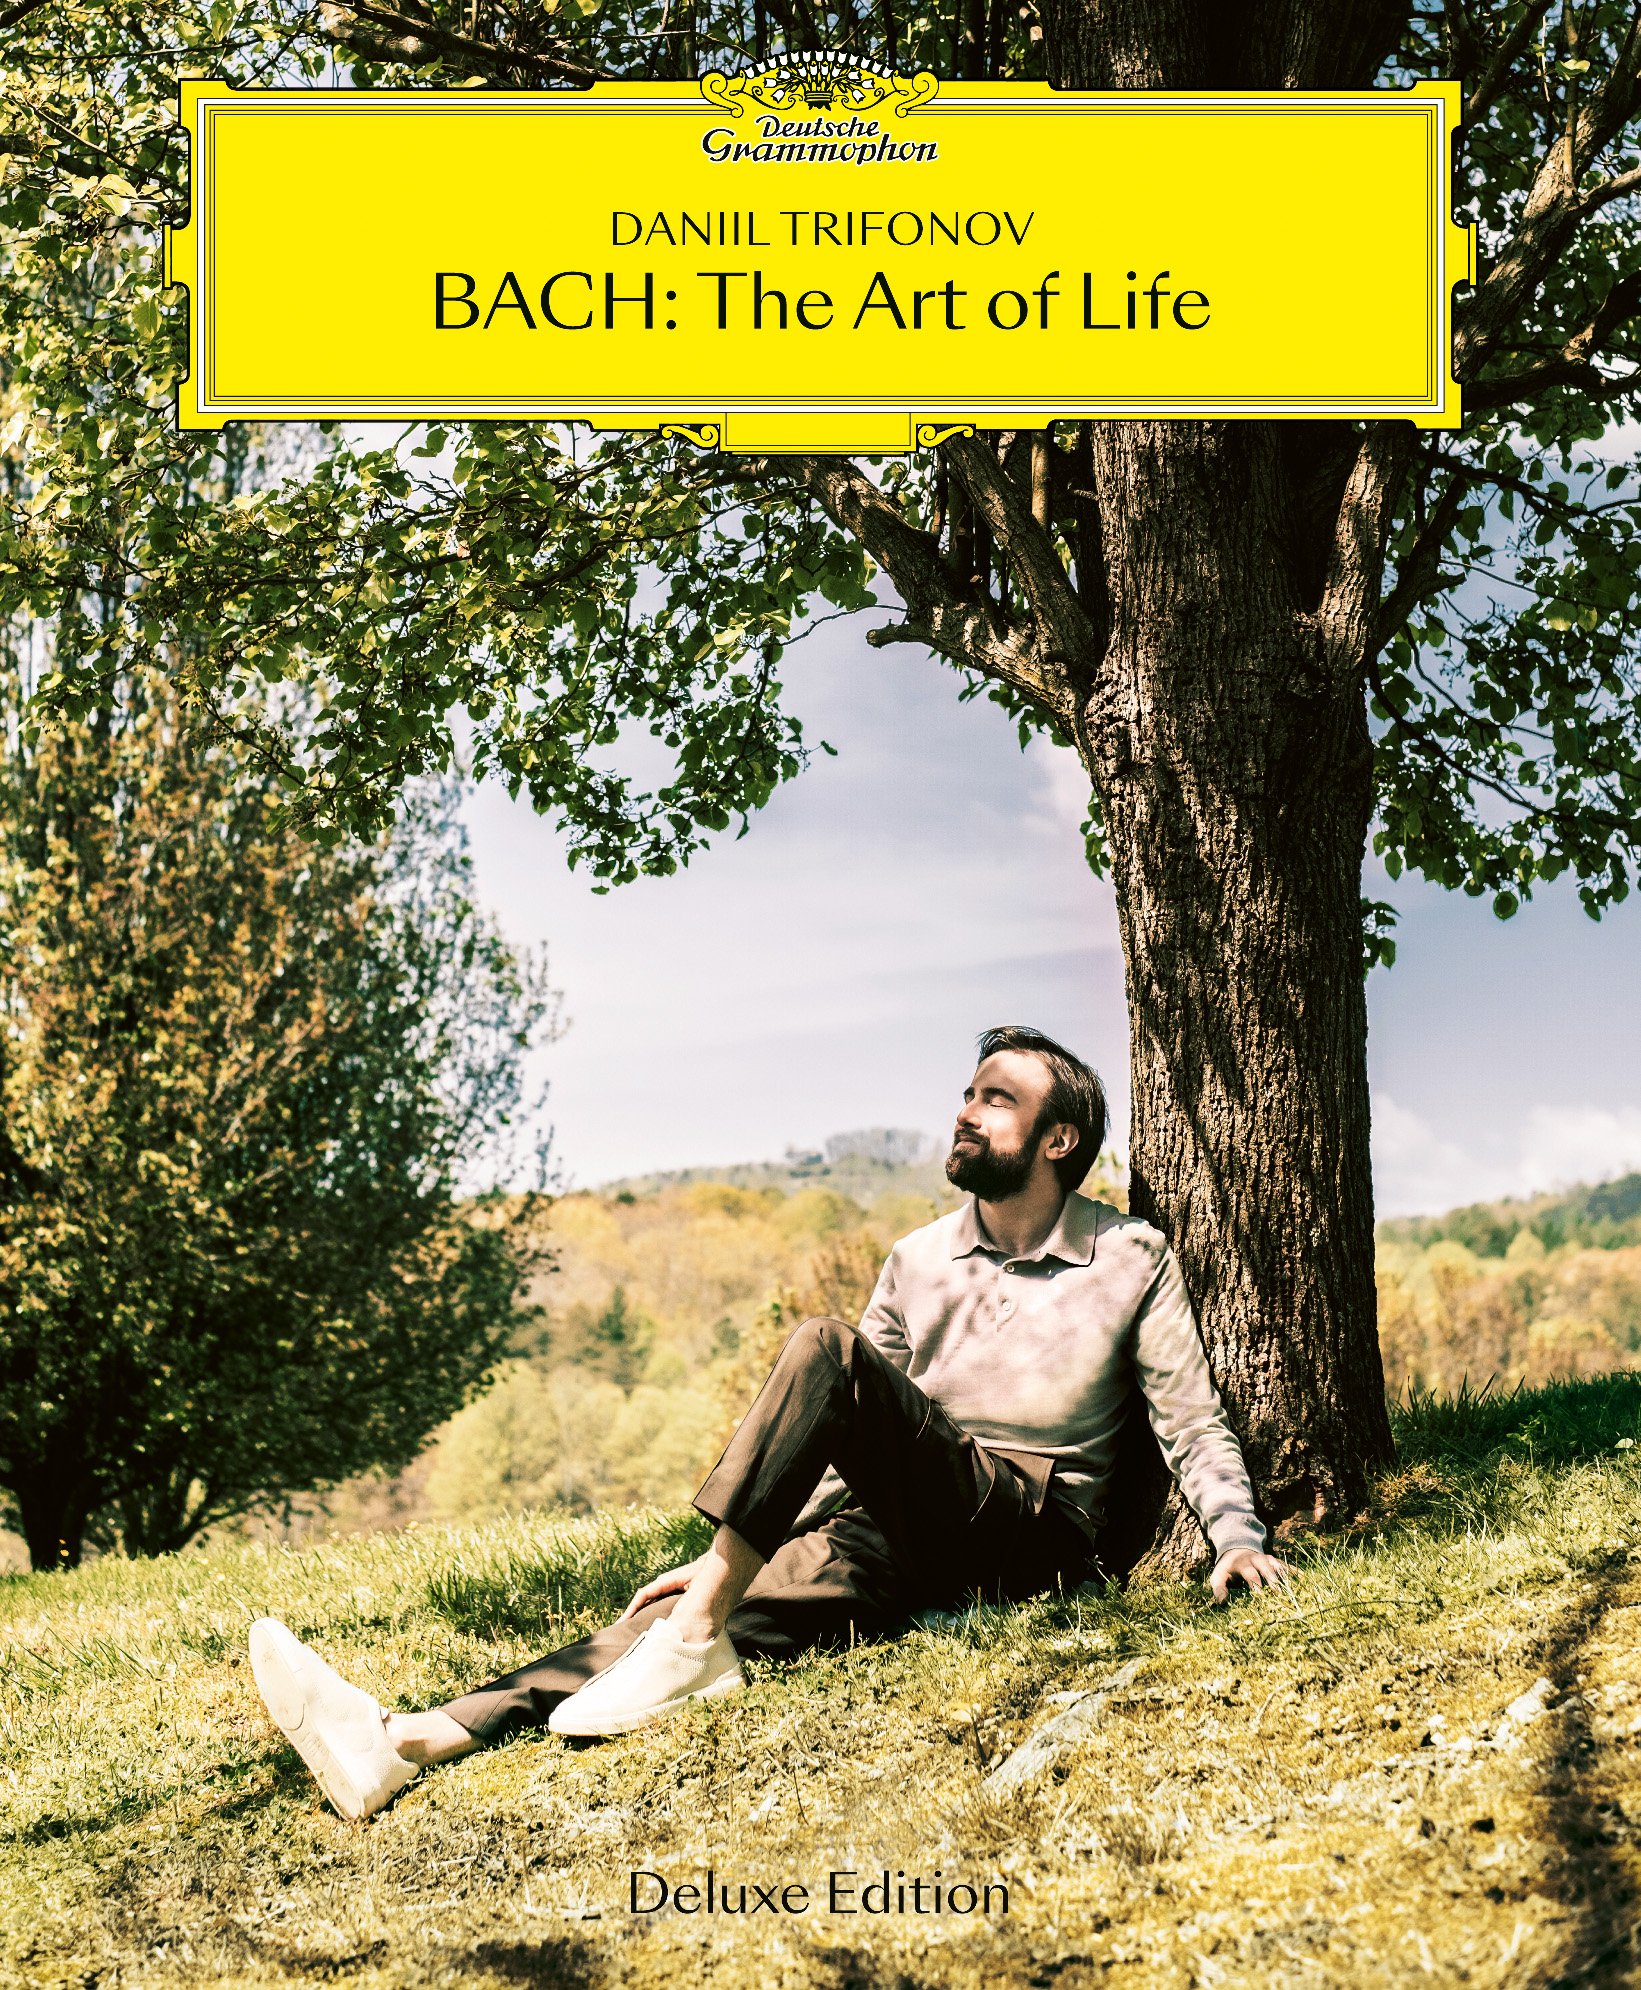 bach-the-art-of-life-deluxe-version.jpg